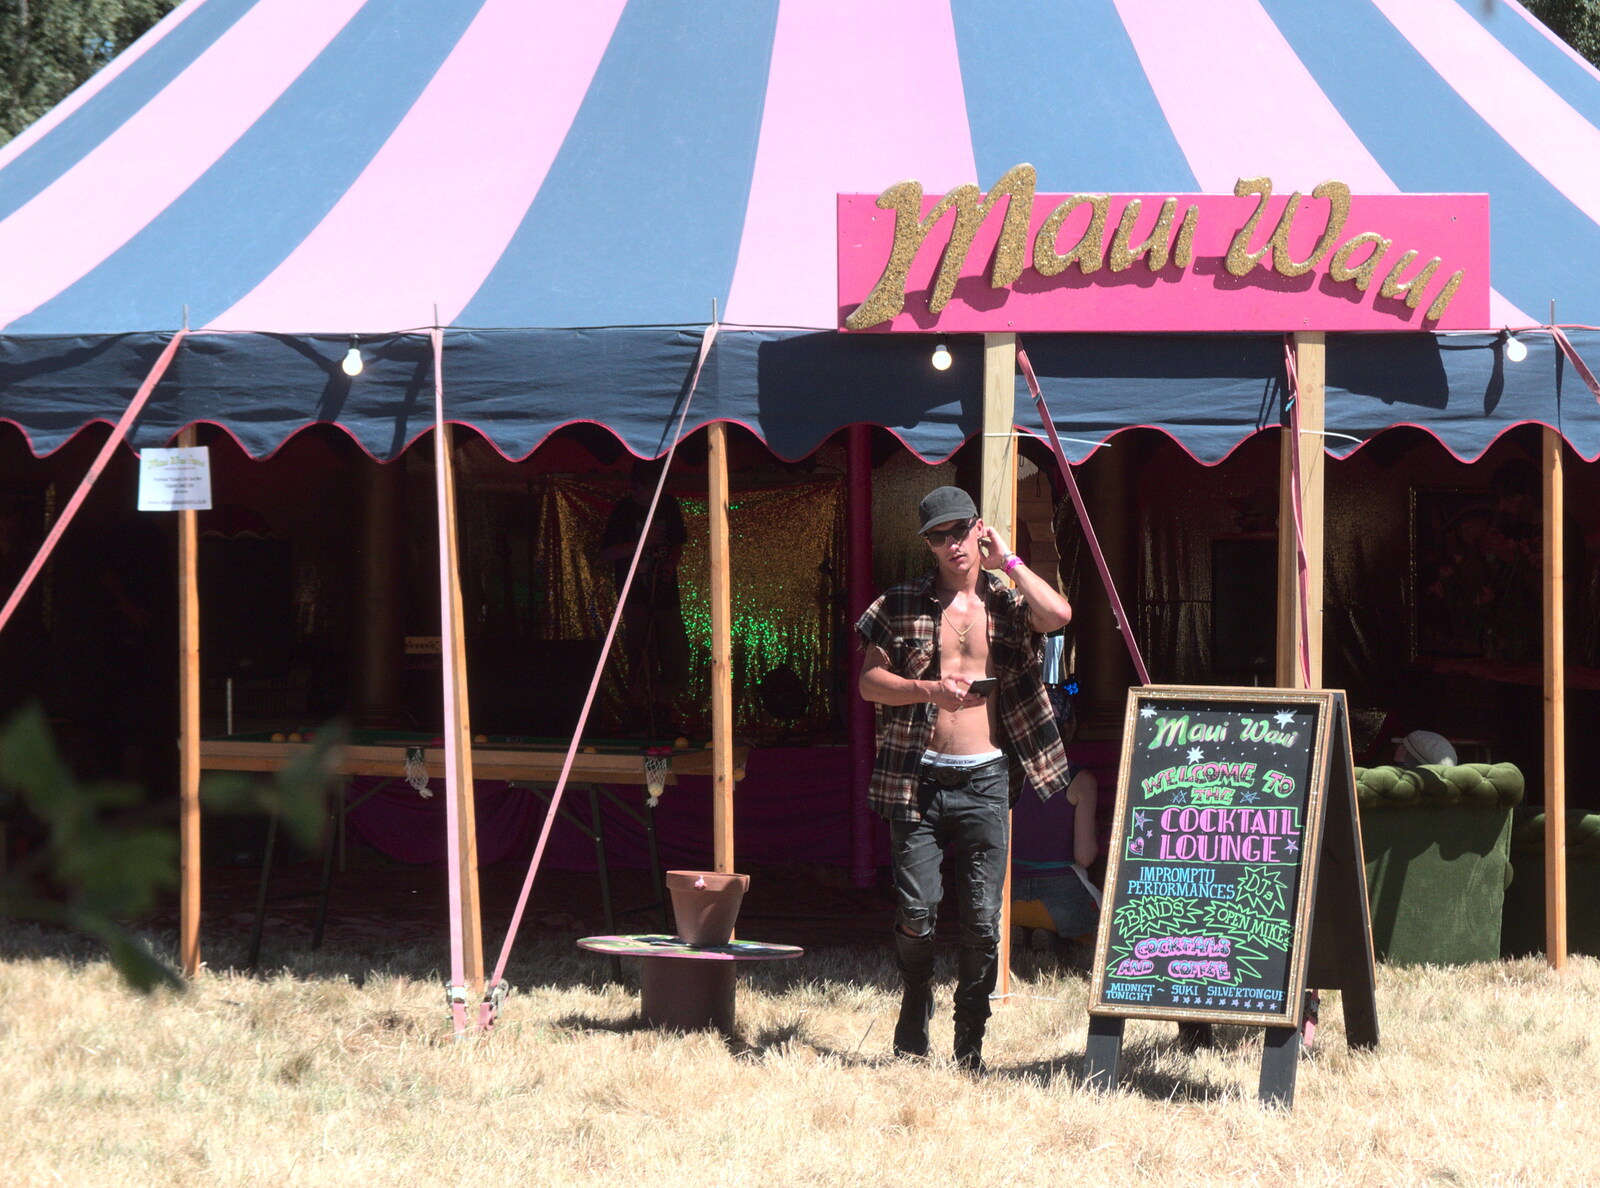 The Maui Waui tent from WoW Festival, Burston, Norfolk - 29th June - 1st July 2018